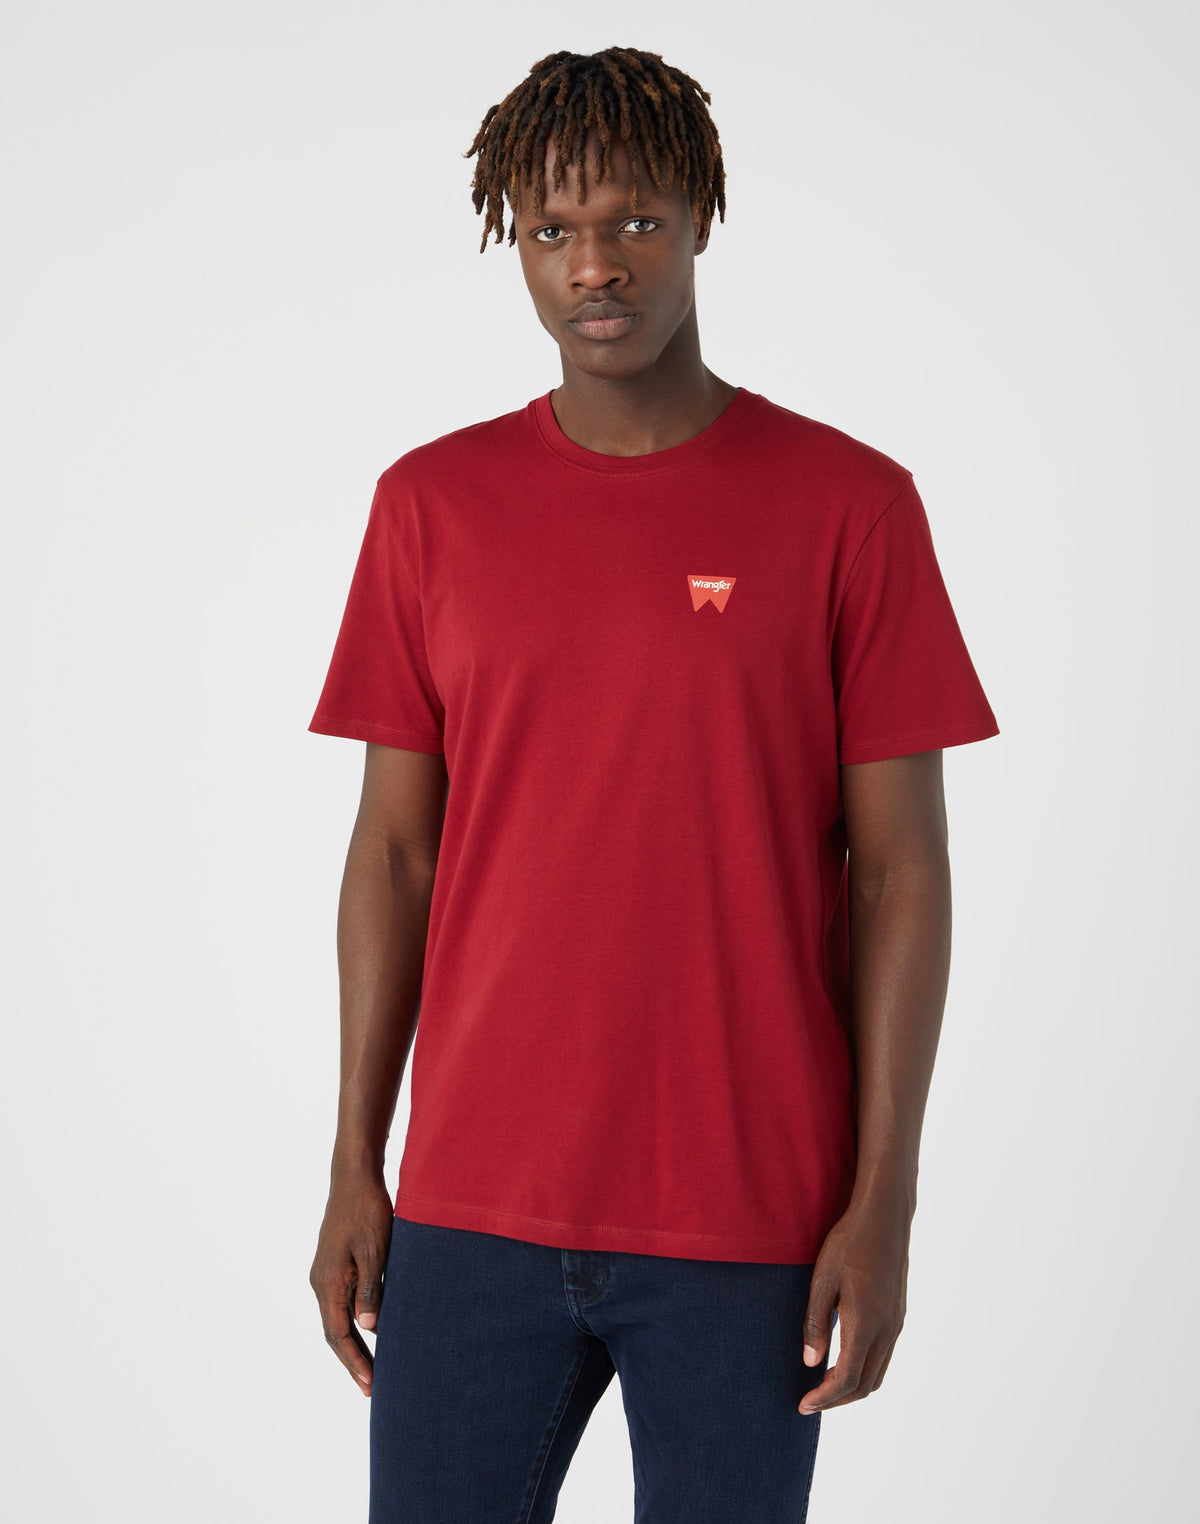 Sign Off Tee in Rhubarb Red